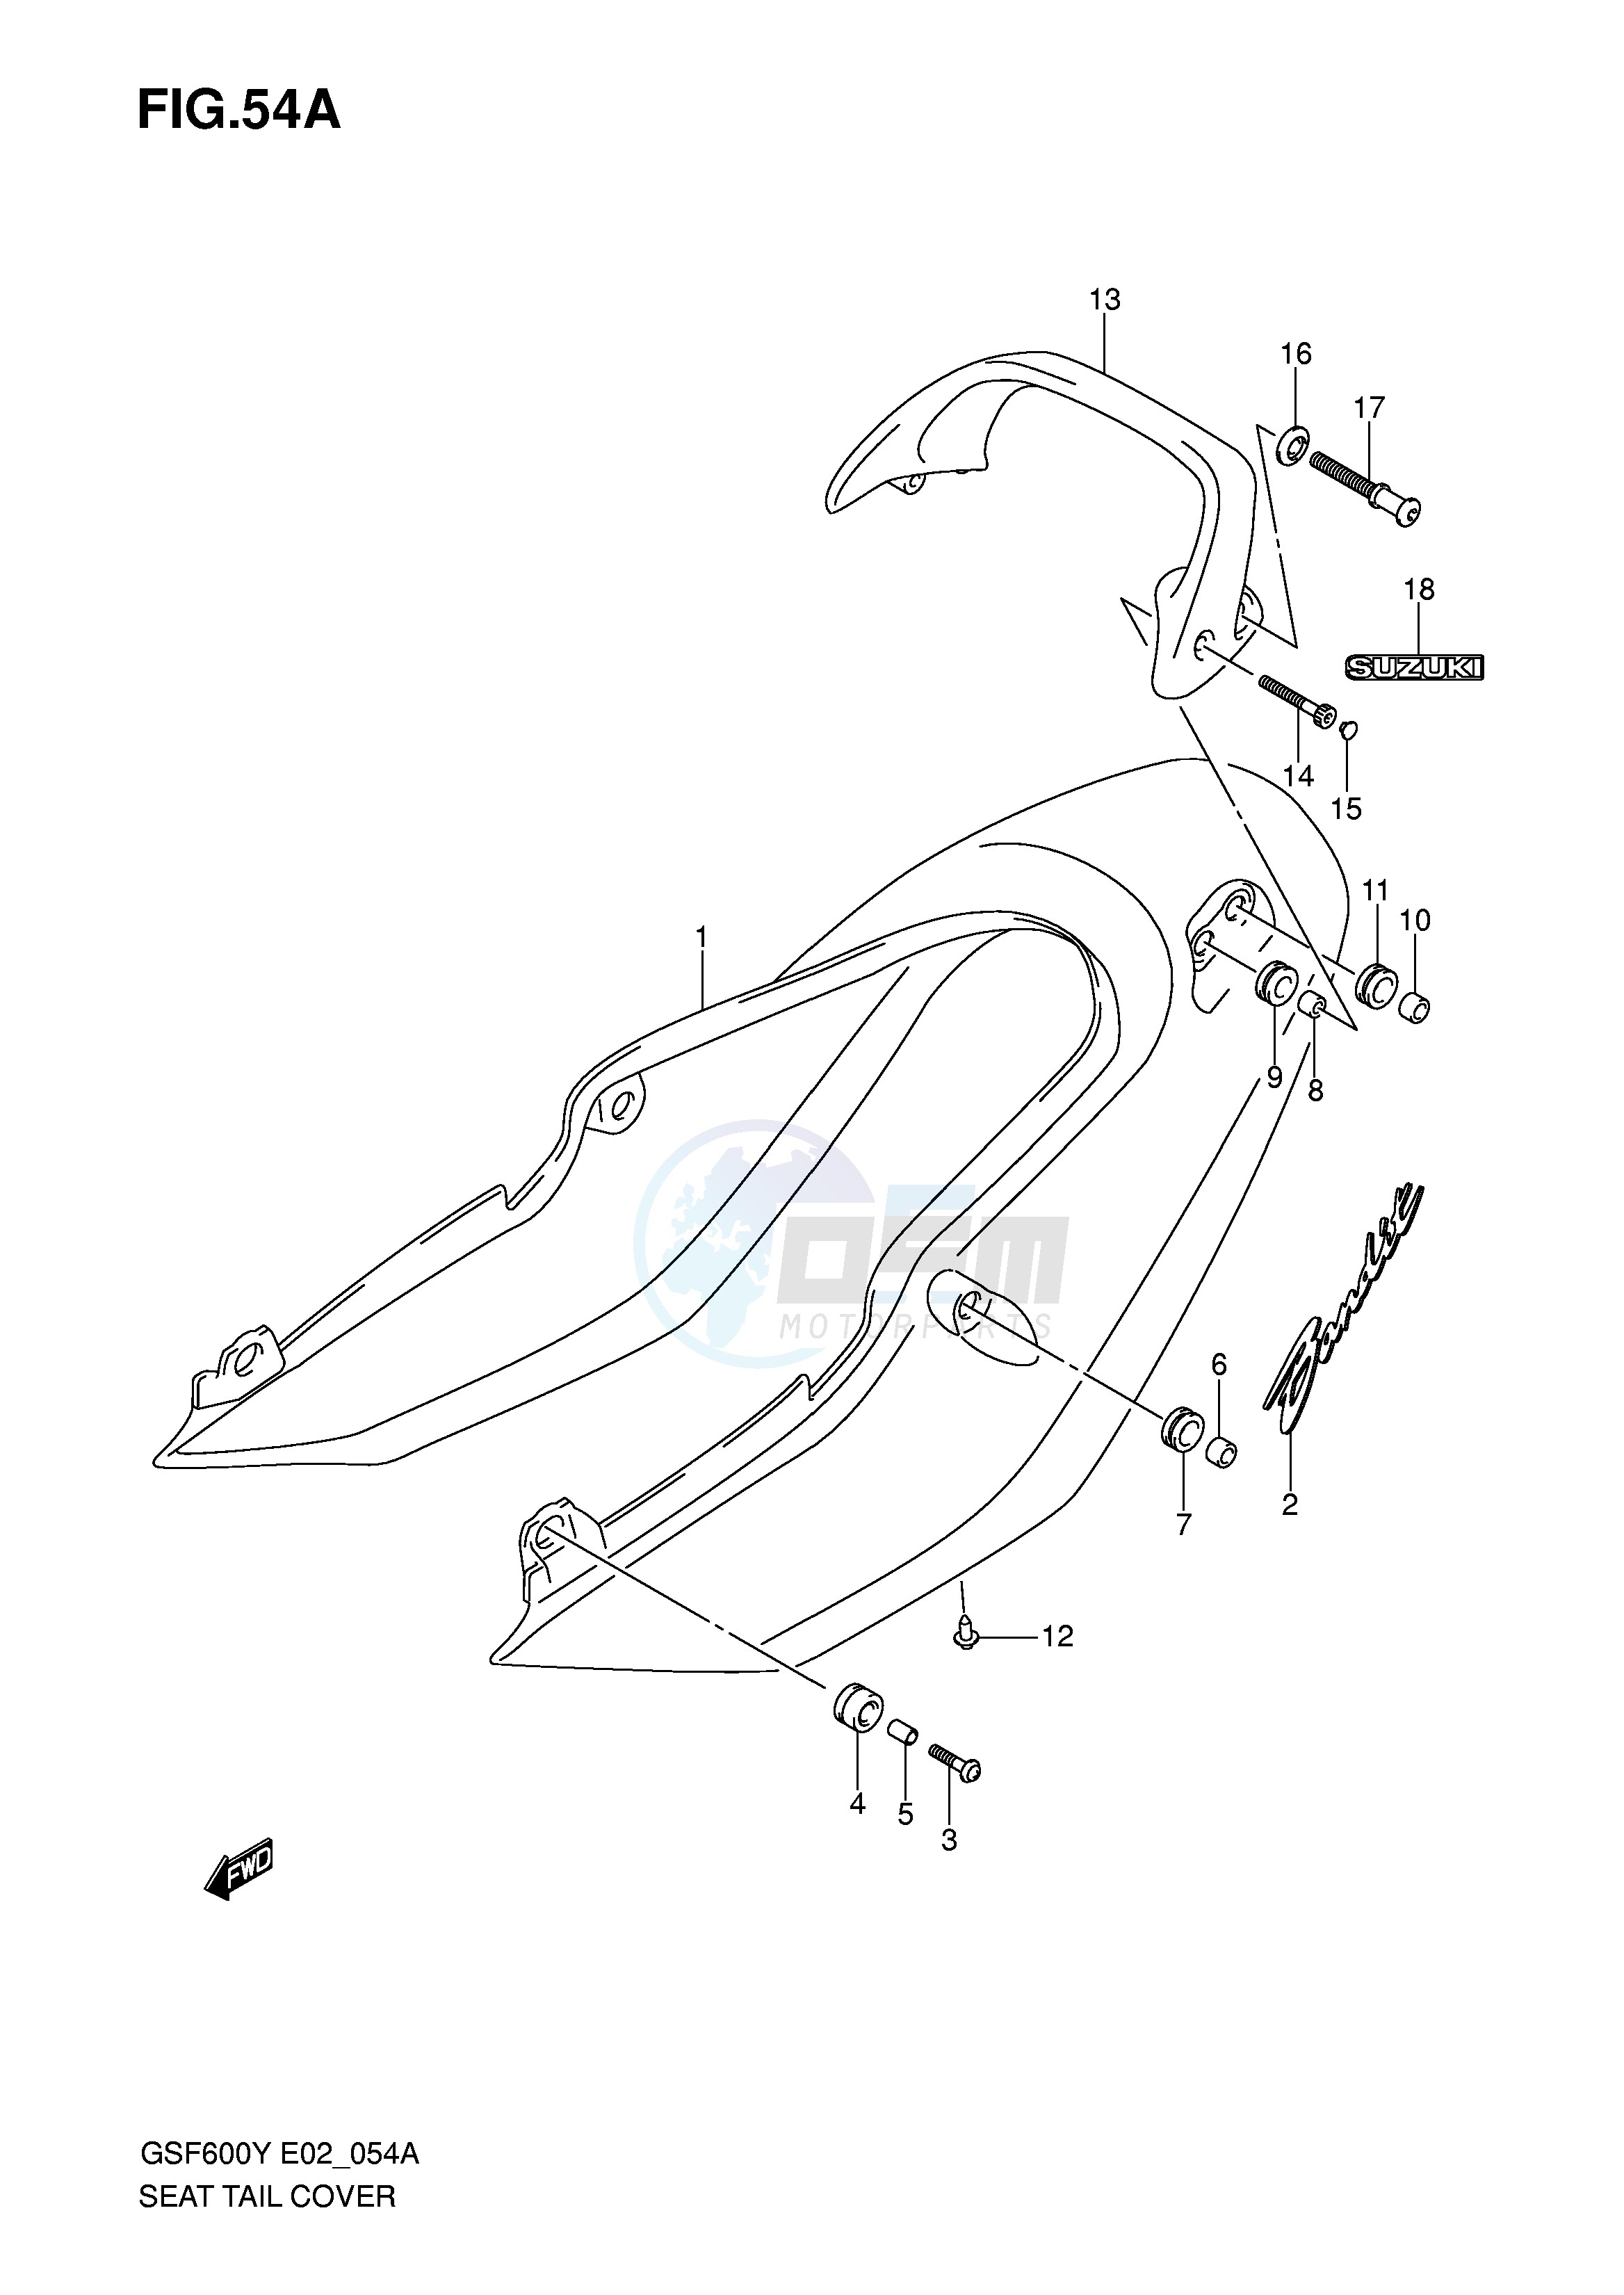 SEAT TAIL COVER (GSF600K1 UK1) blueprint